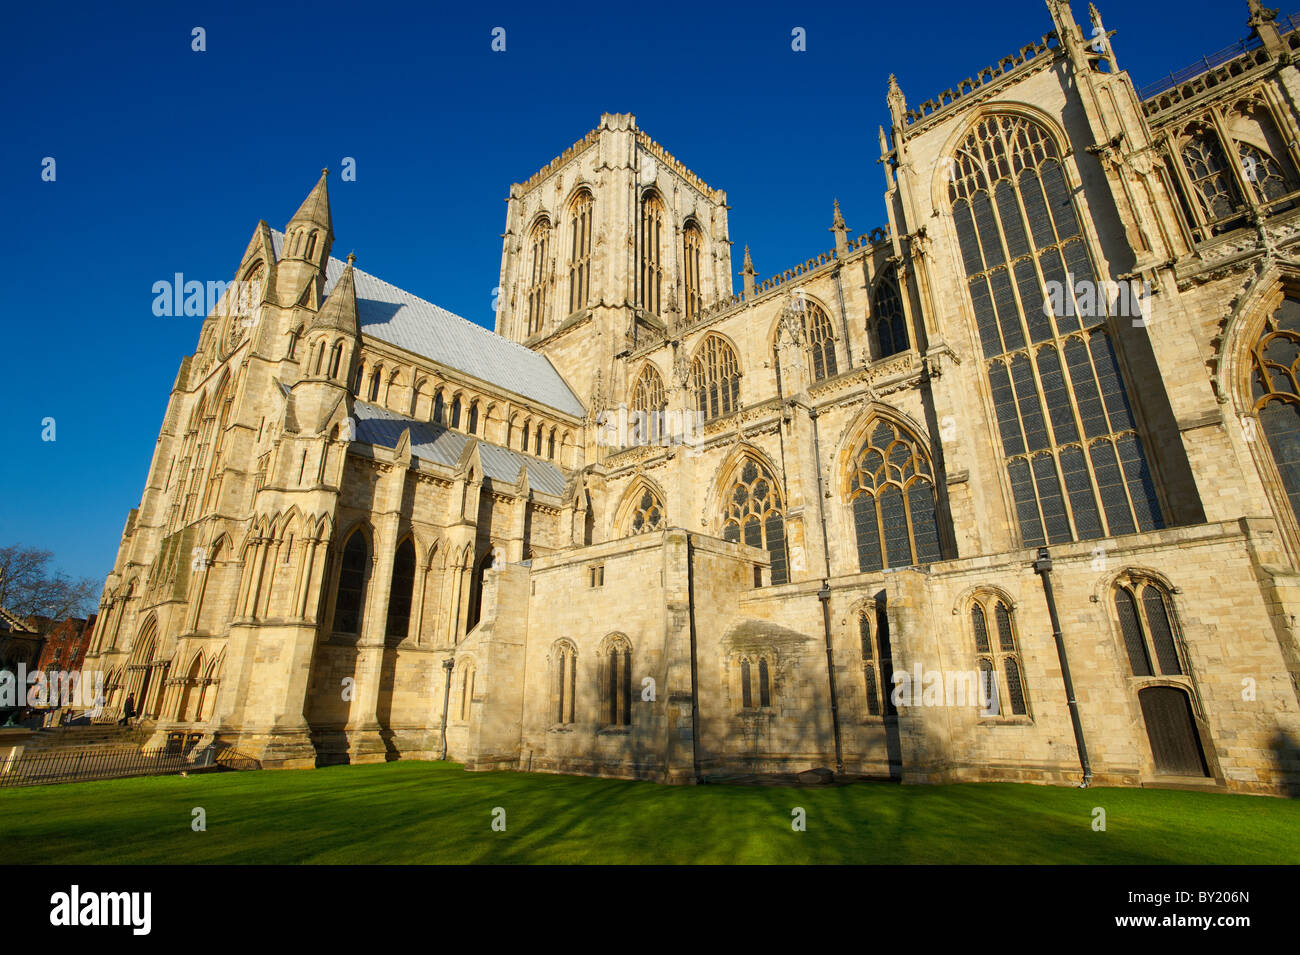 Exterior  Gothic architecture of the Cathedral and Metropolitical Church of Saint Peter in York, commonly known as York Minster. Stock Photo